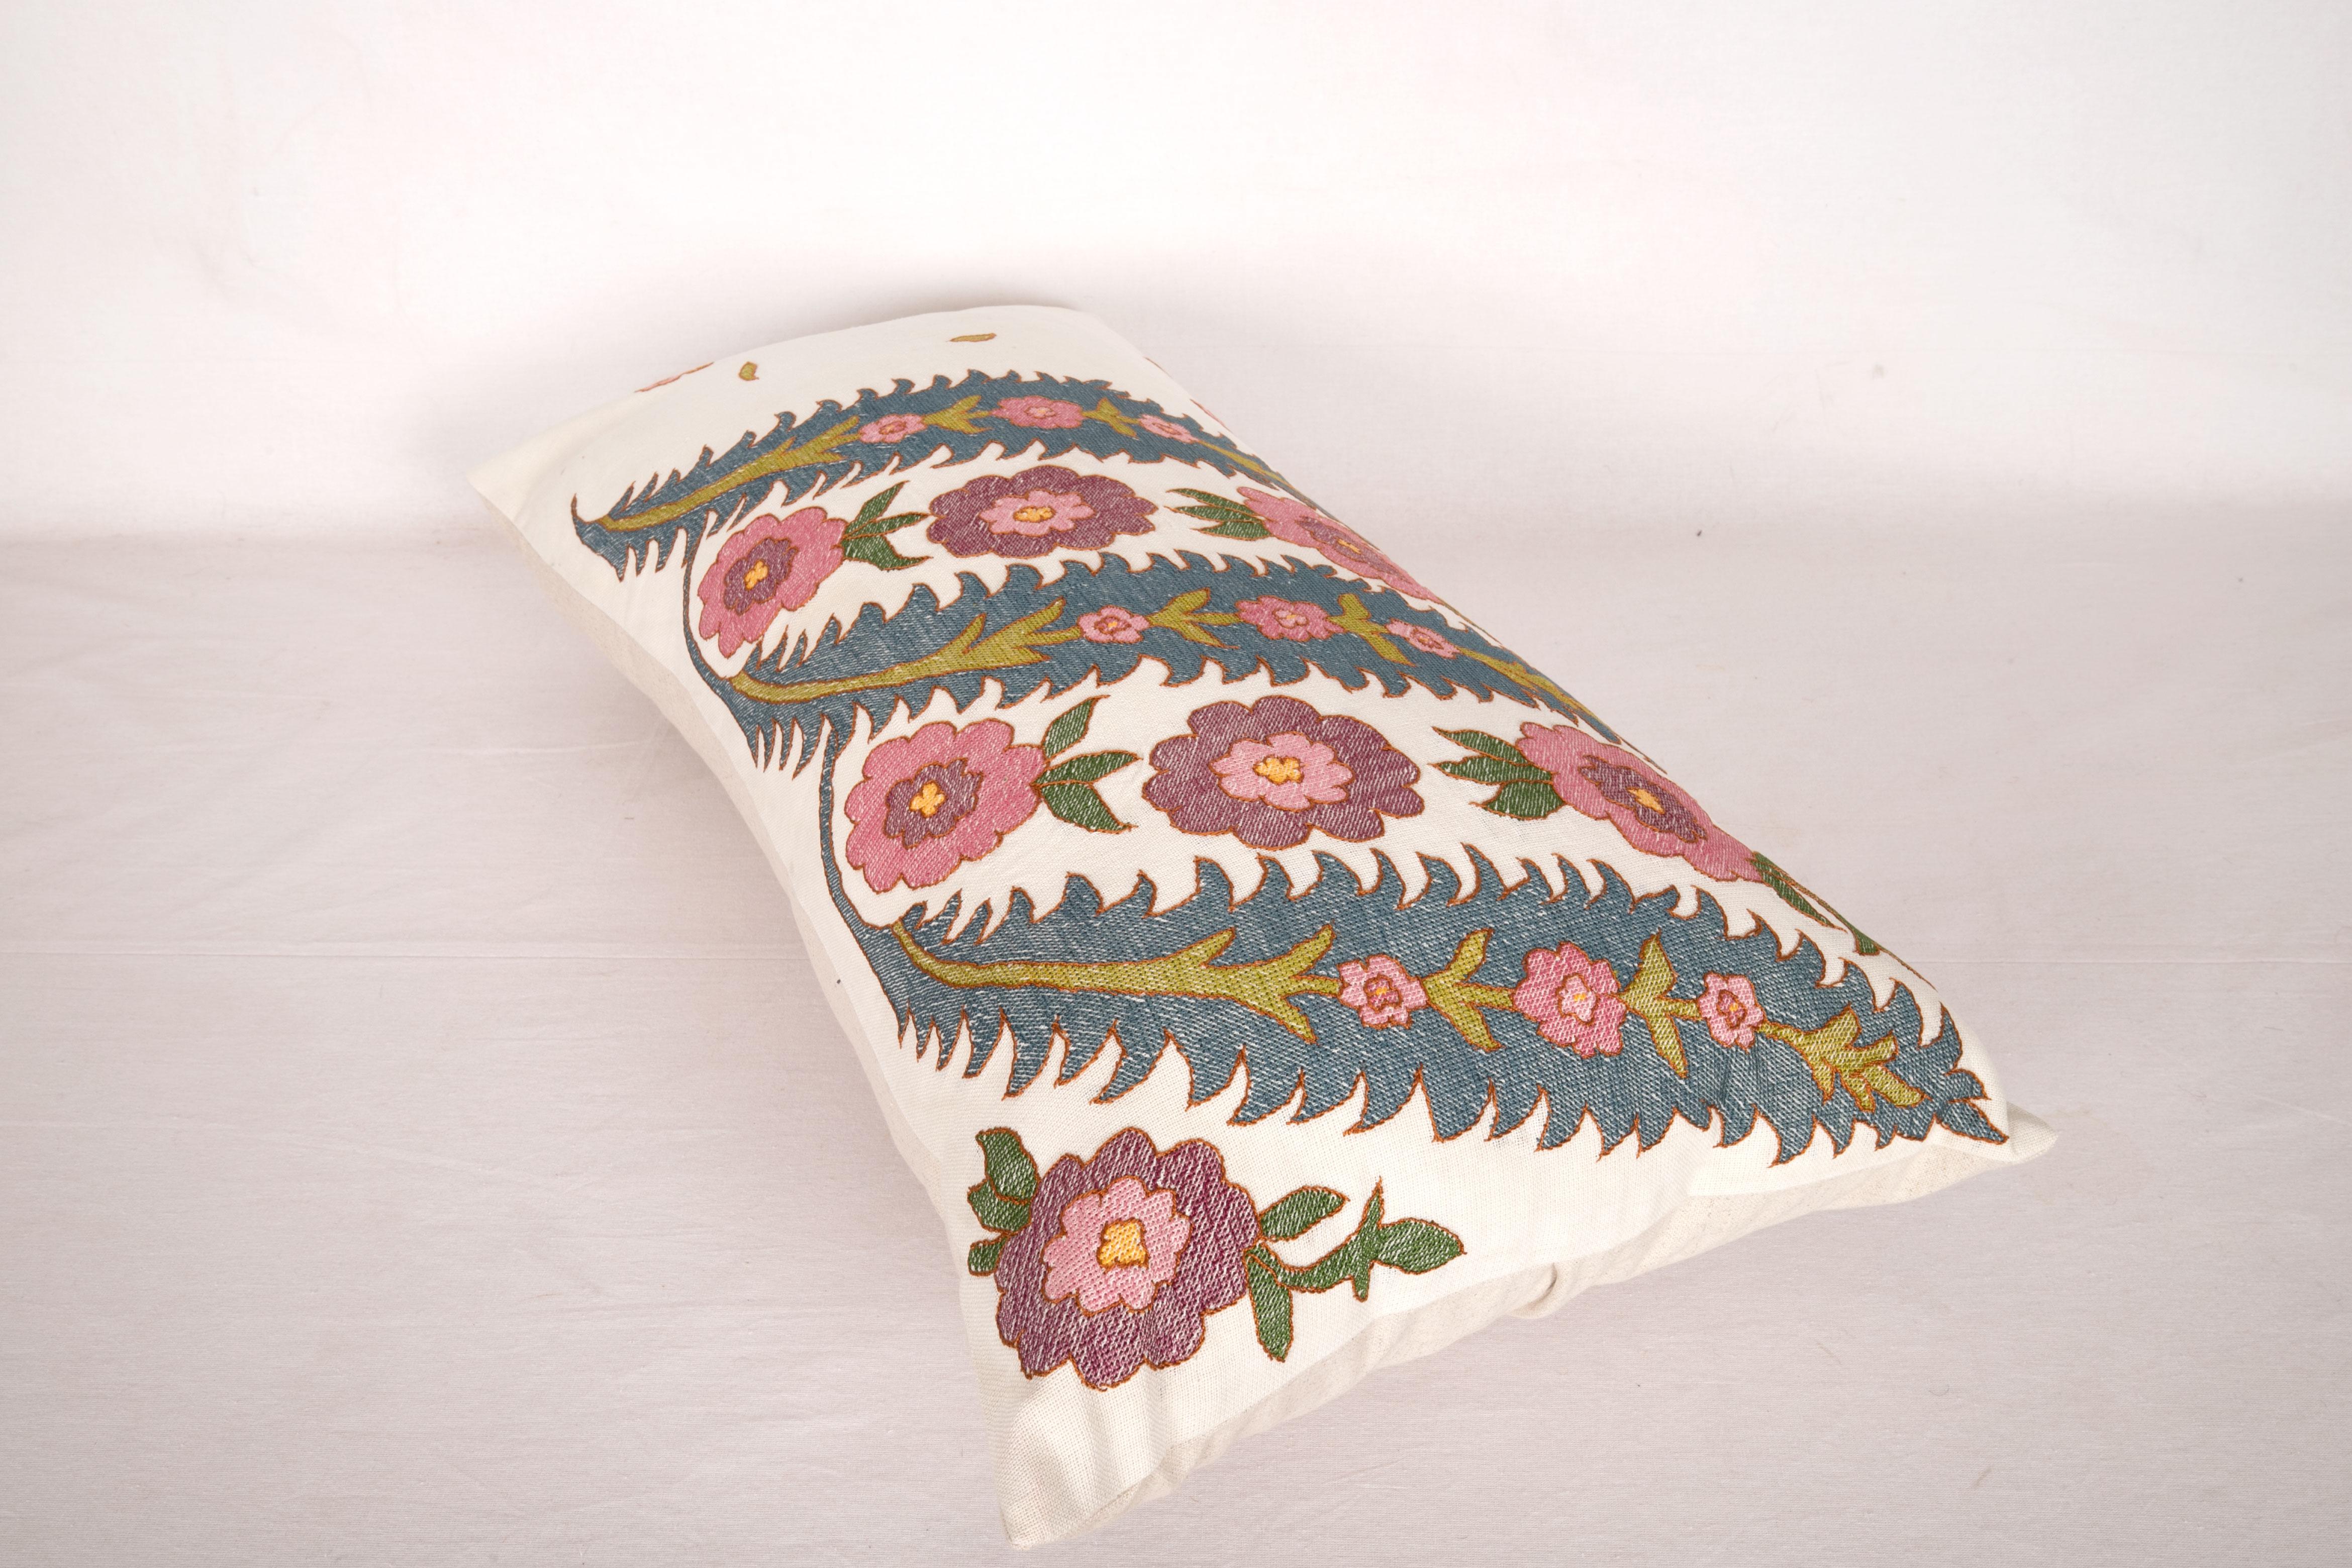 20th Century Antique Pillow Case Fashioned from an Eastern European Embroidery